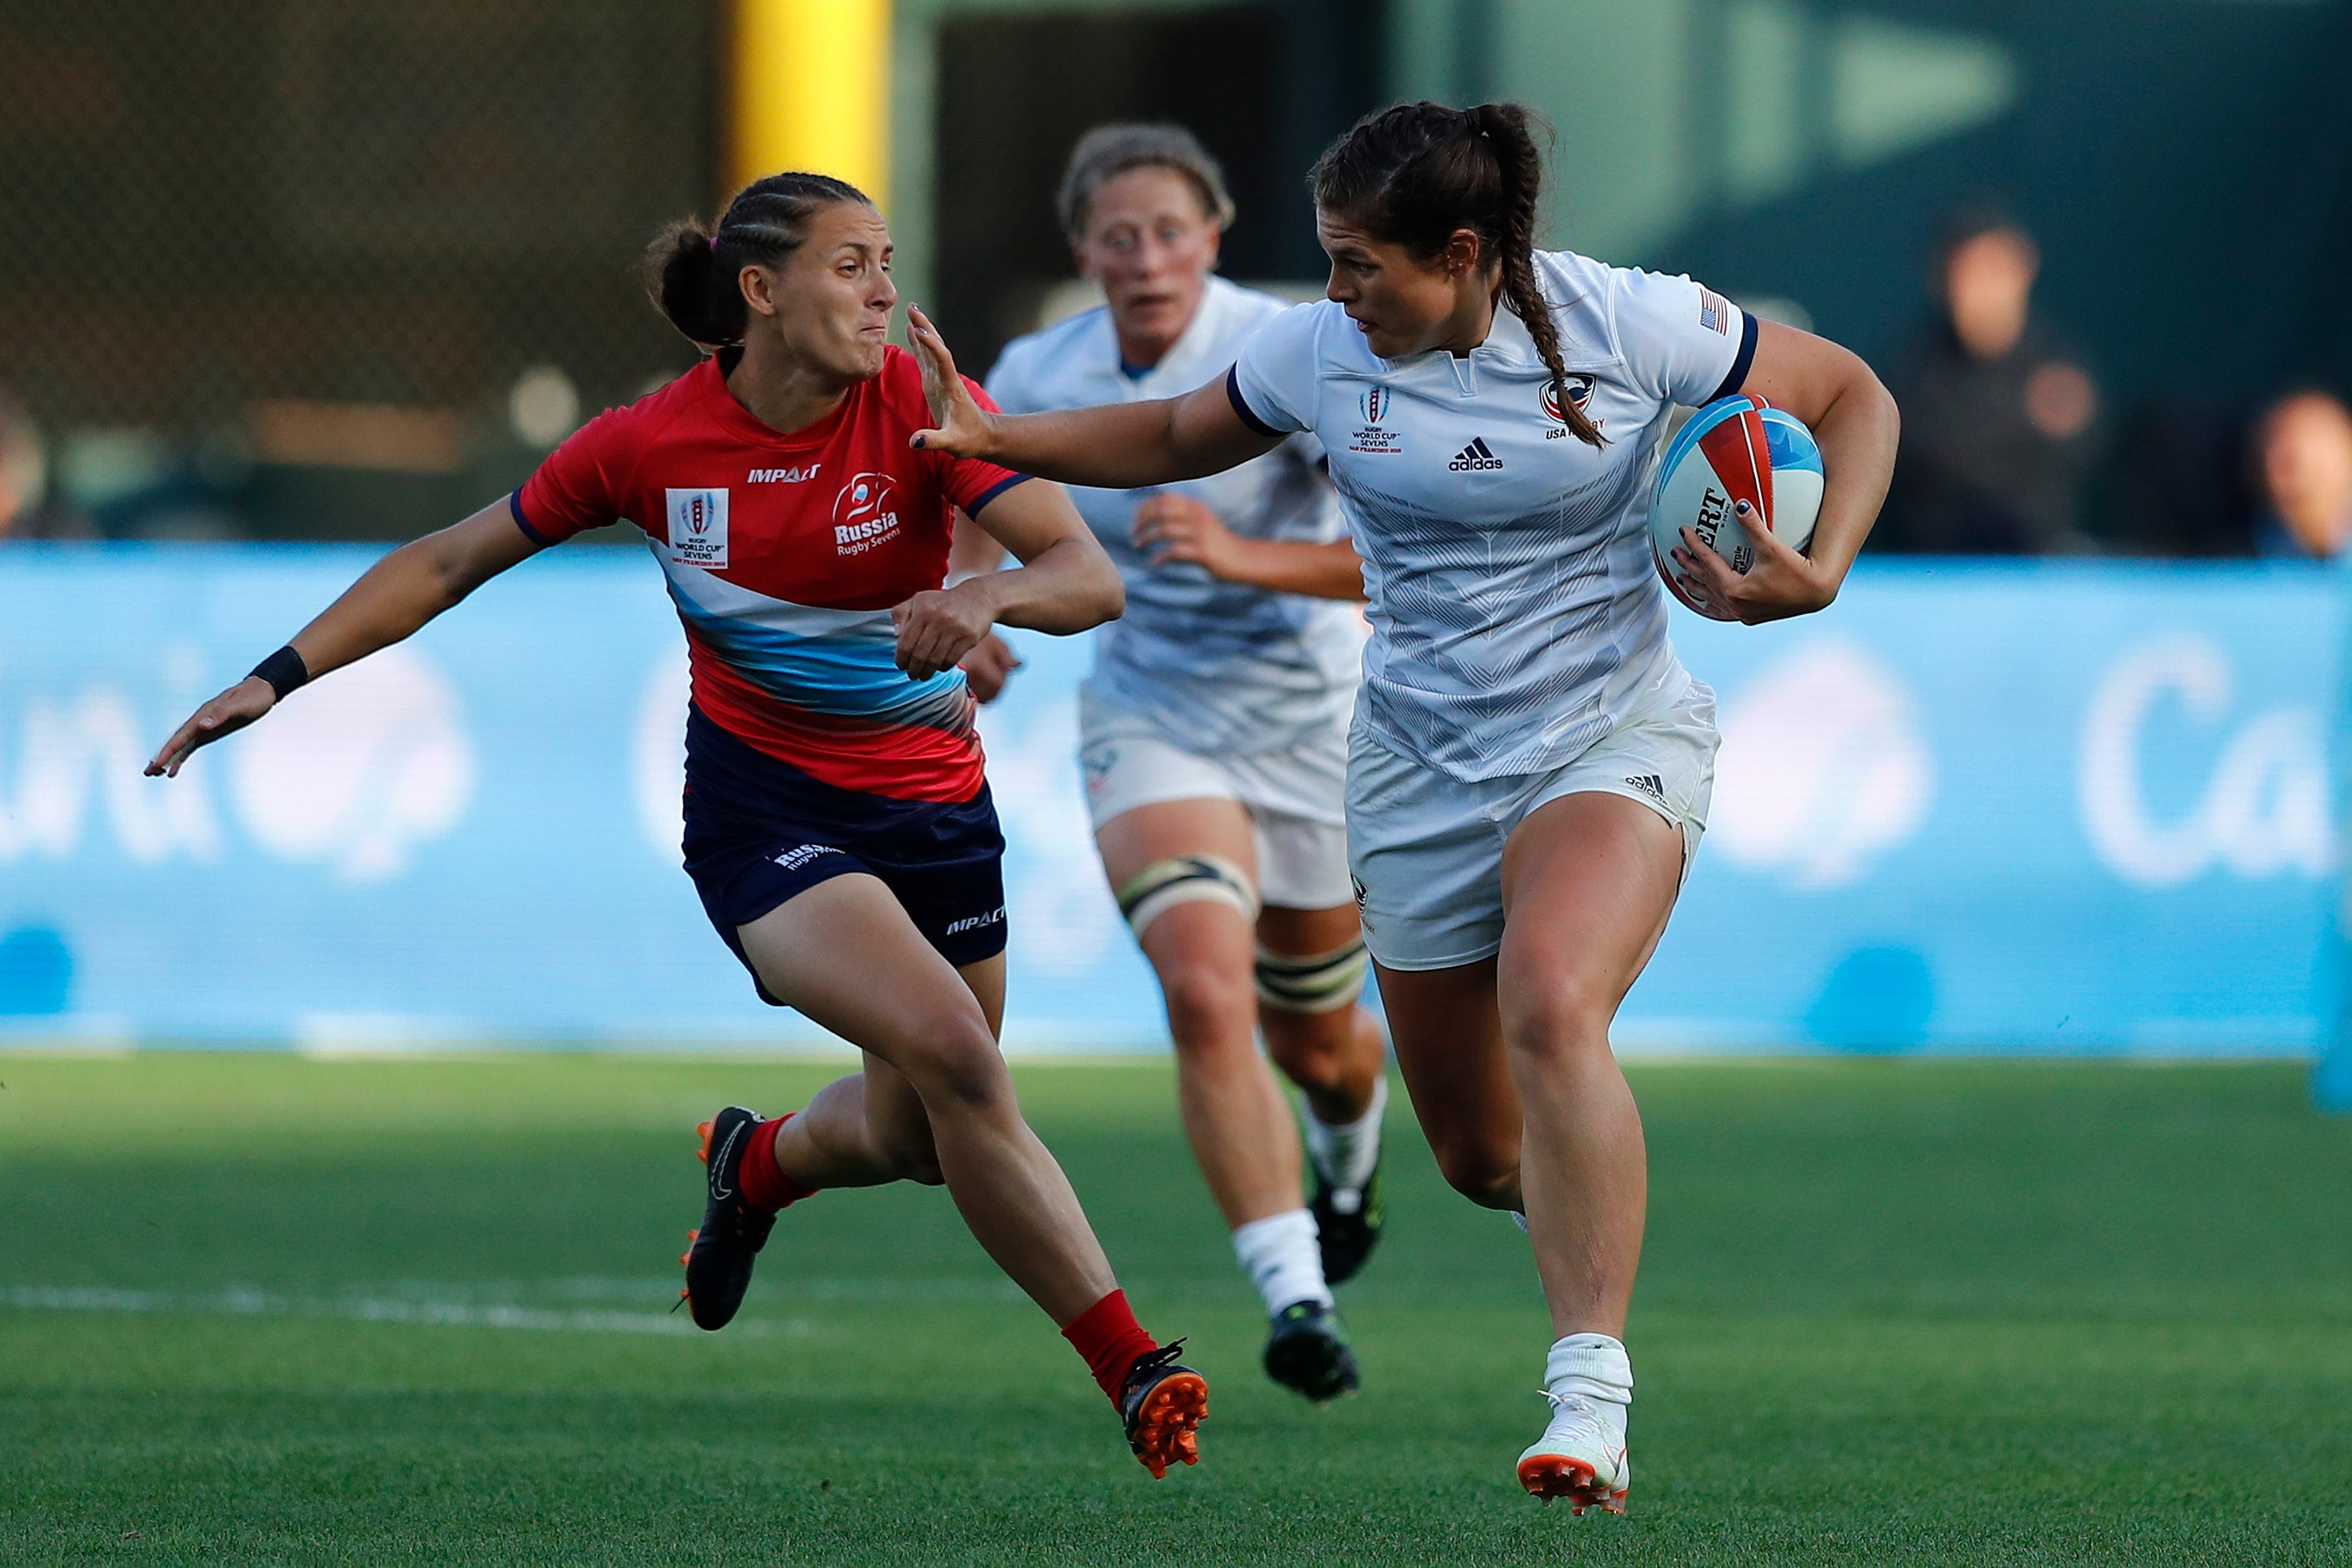 USA's Ilona Maher fends off the Russia defense on day one of the Rugby World Cup Sevens 2018 at AT&T Park in San Francisco on 20th July, 2018.